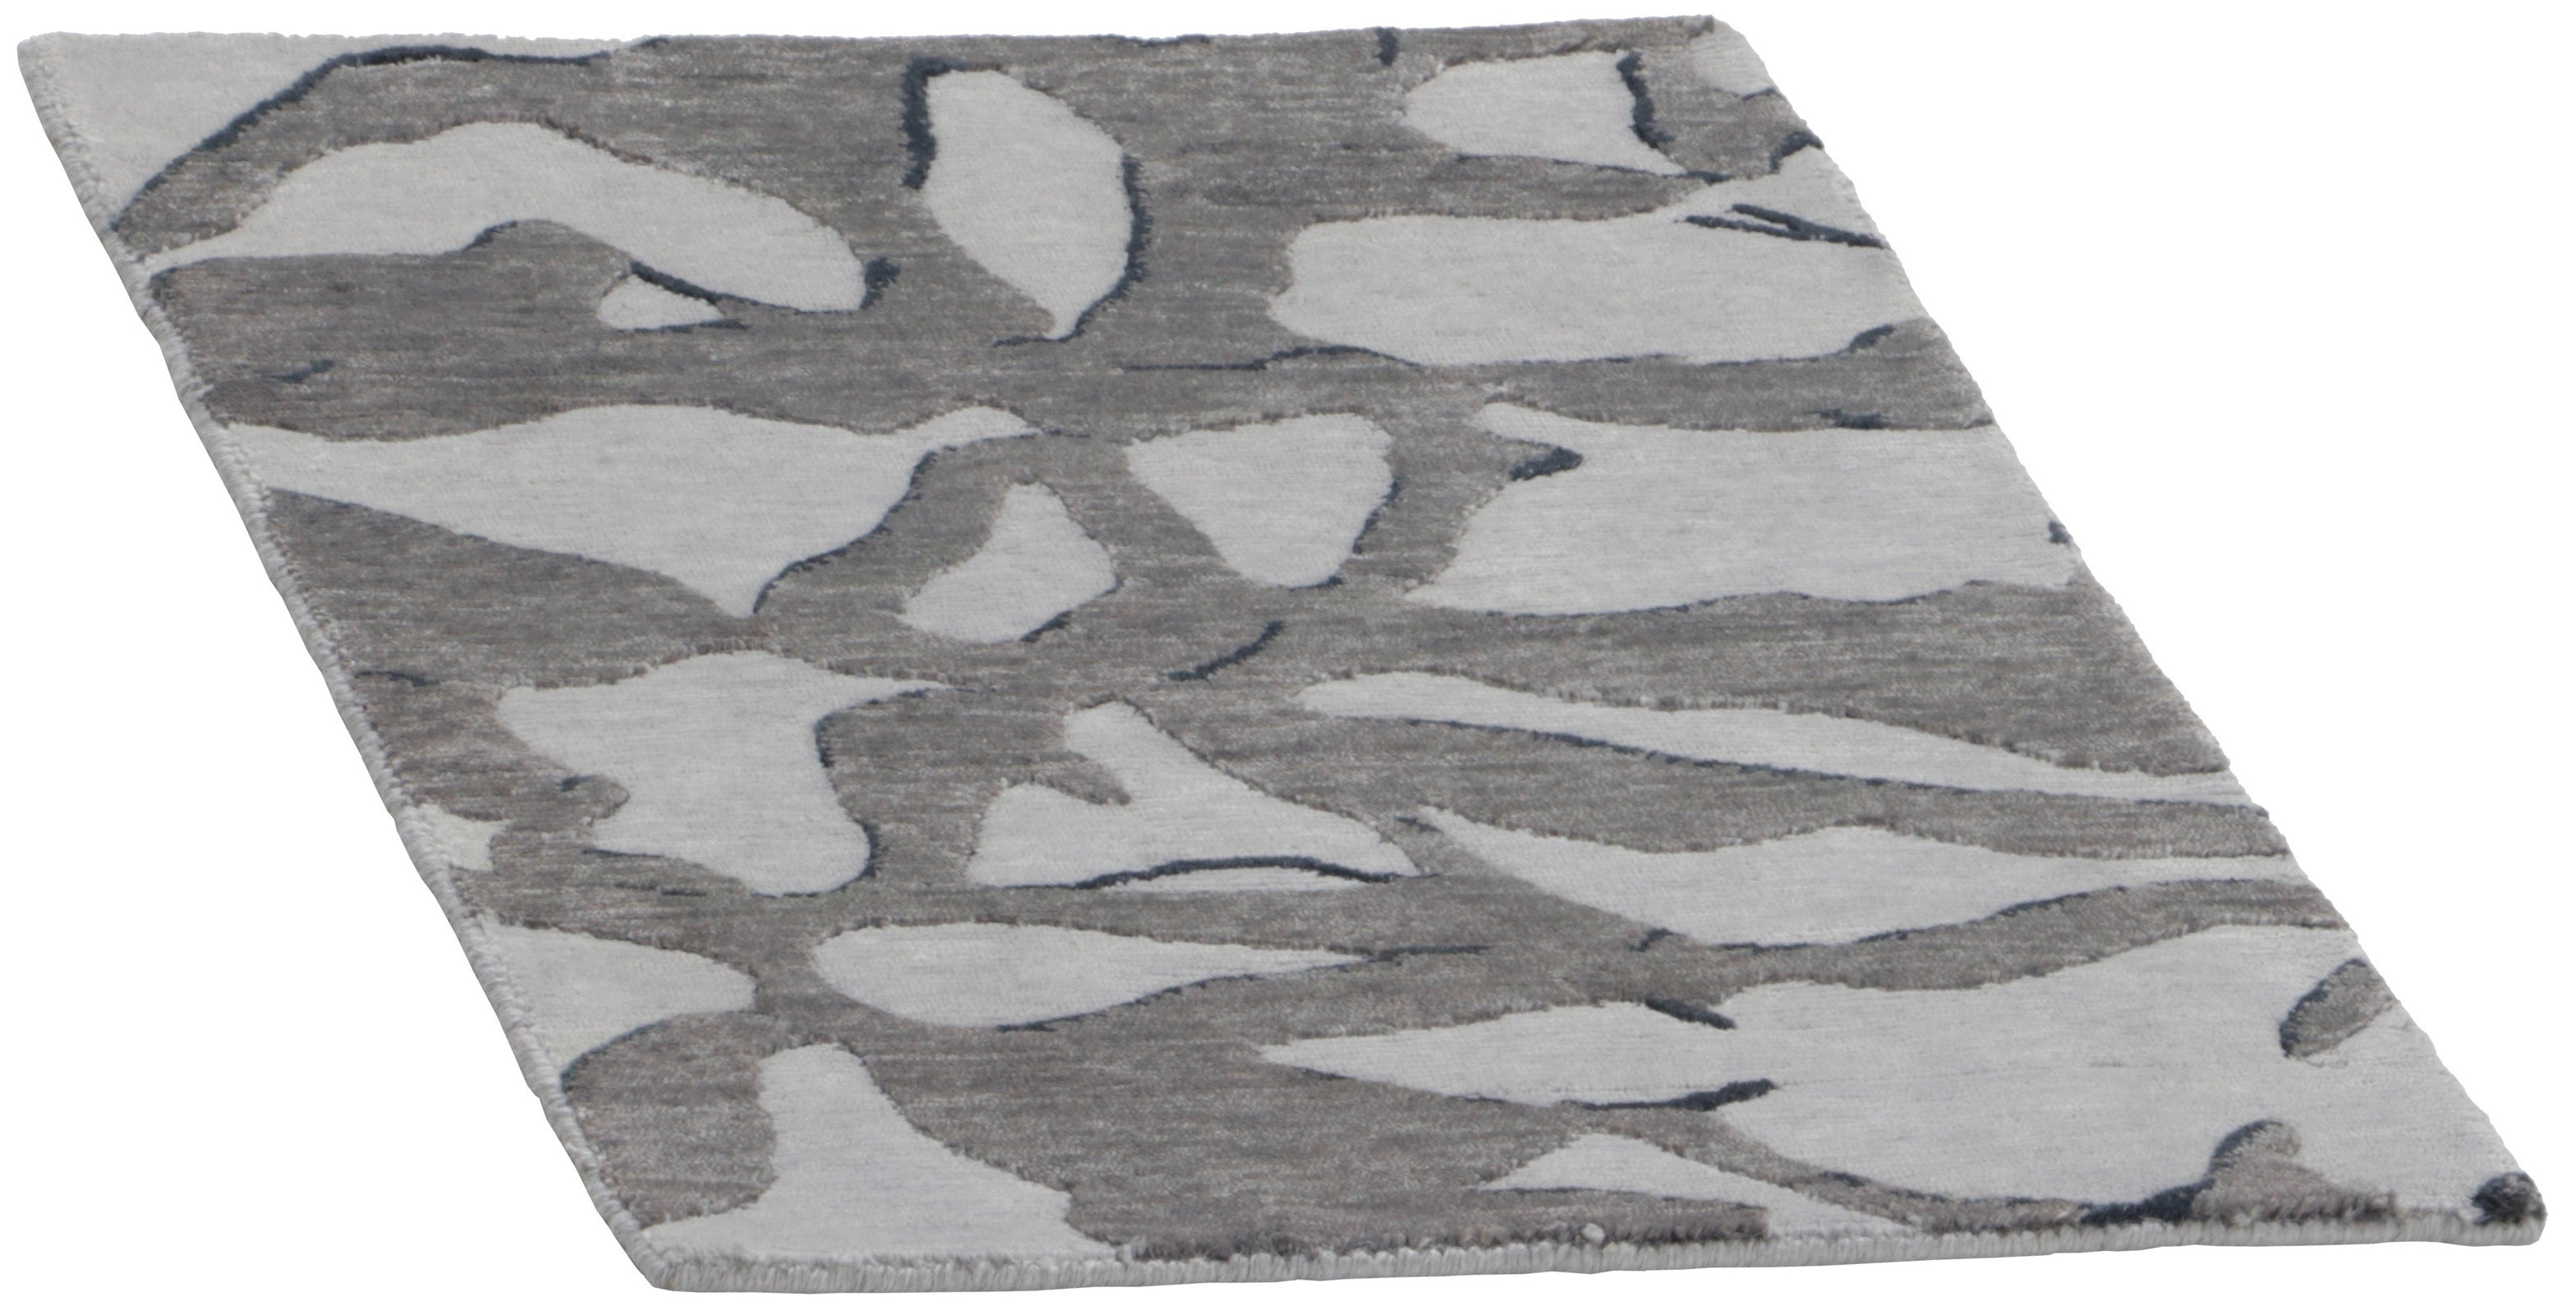 Area rug with abstract design in grey and beige